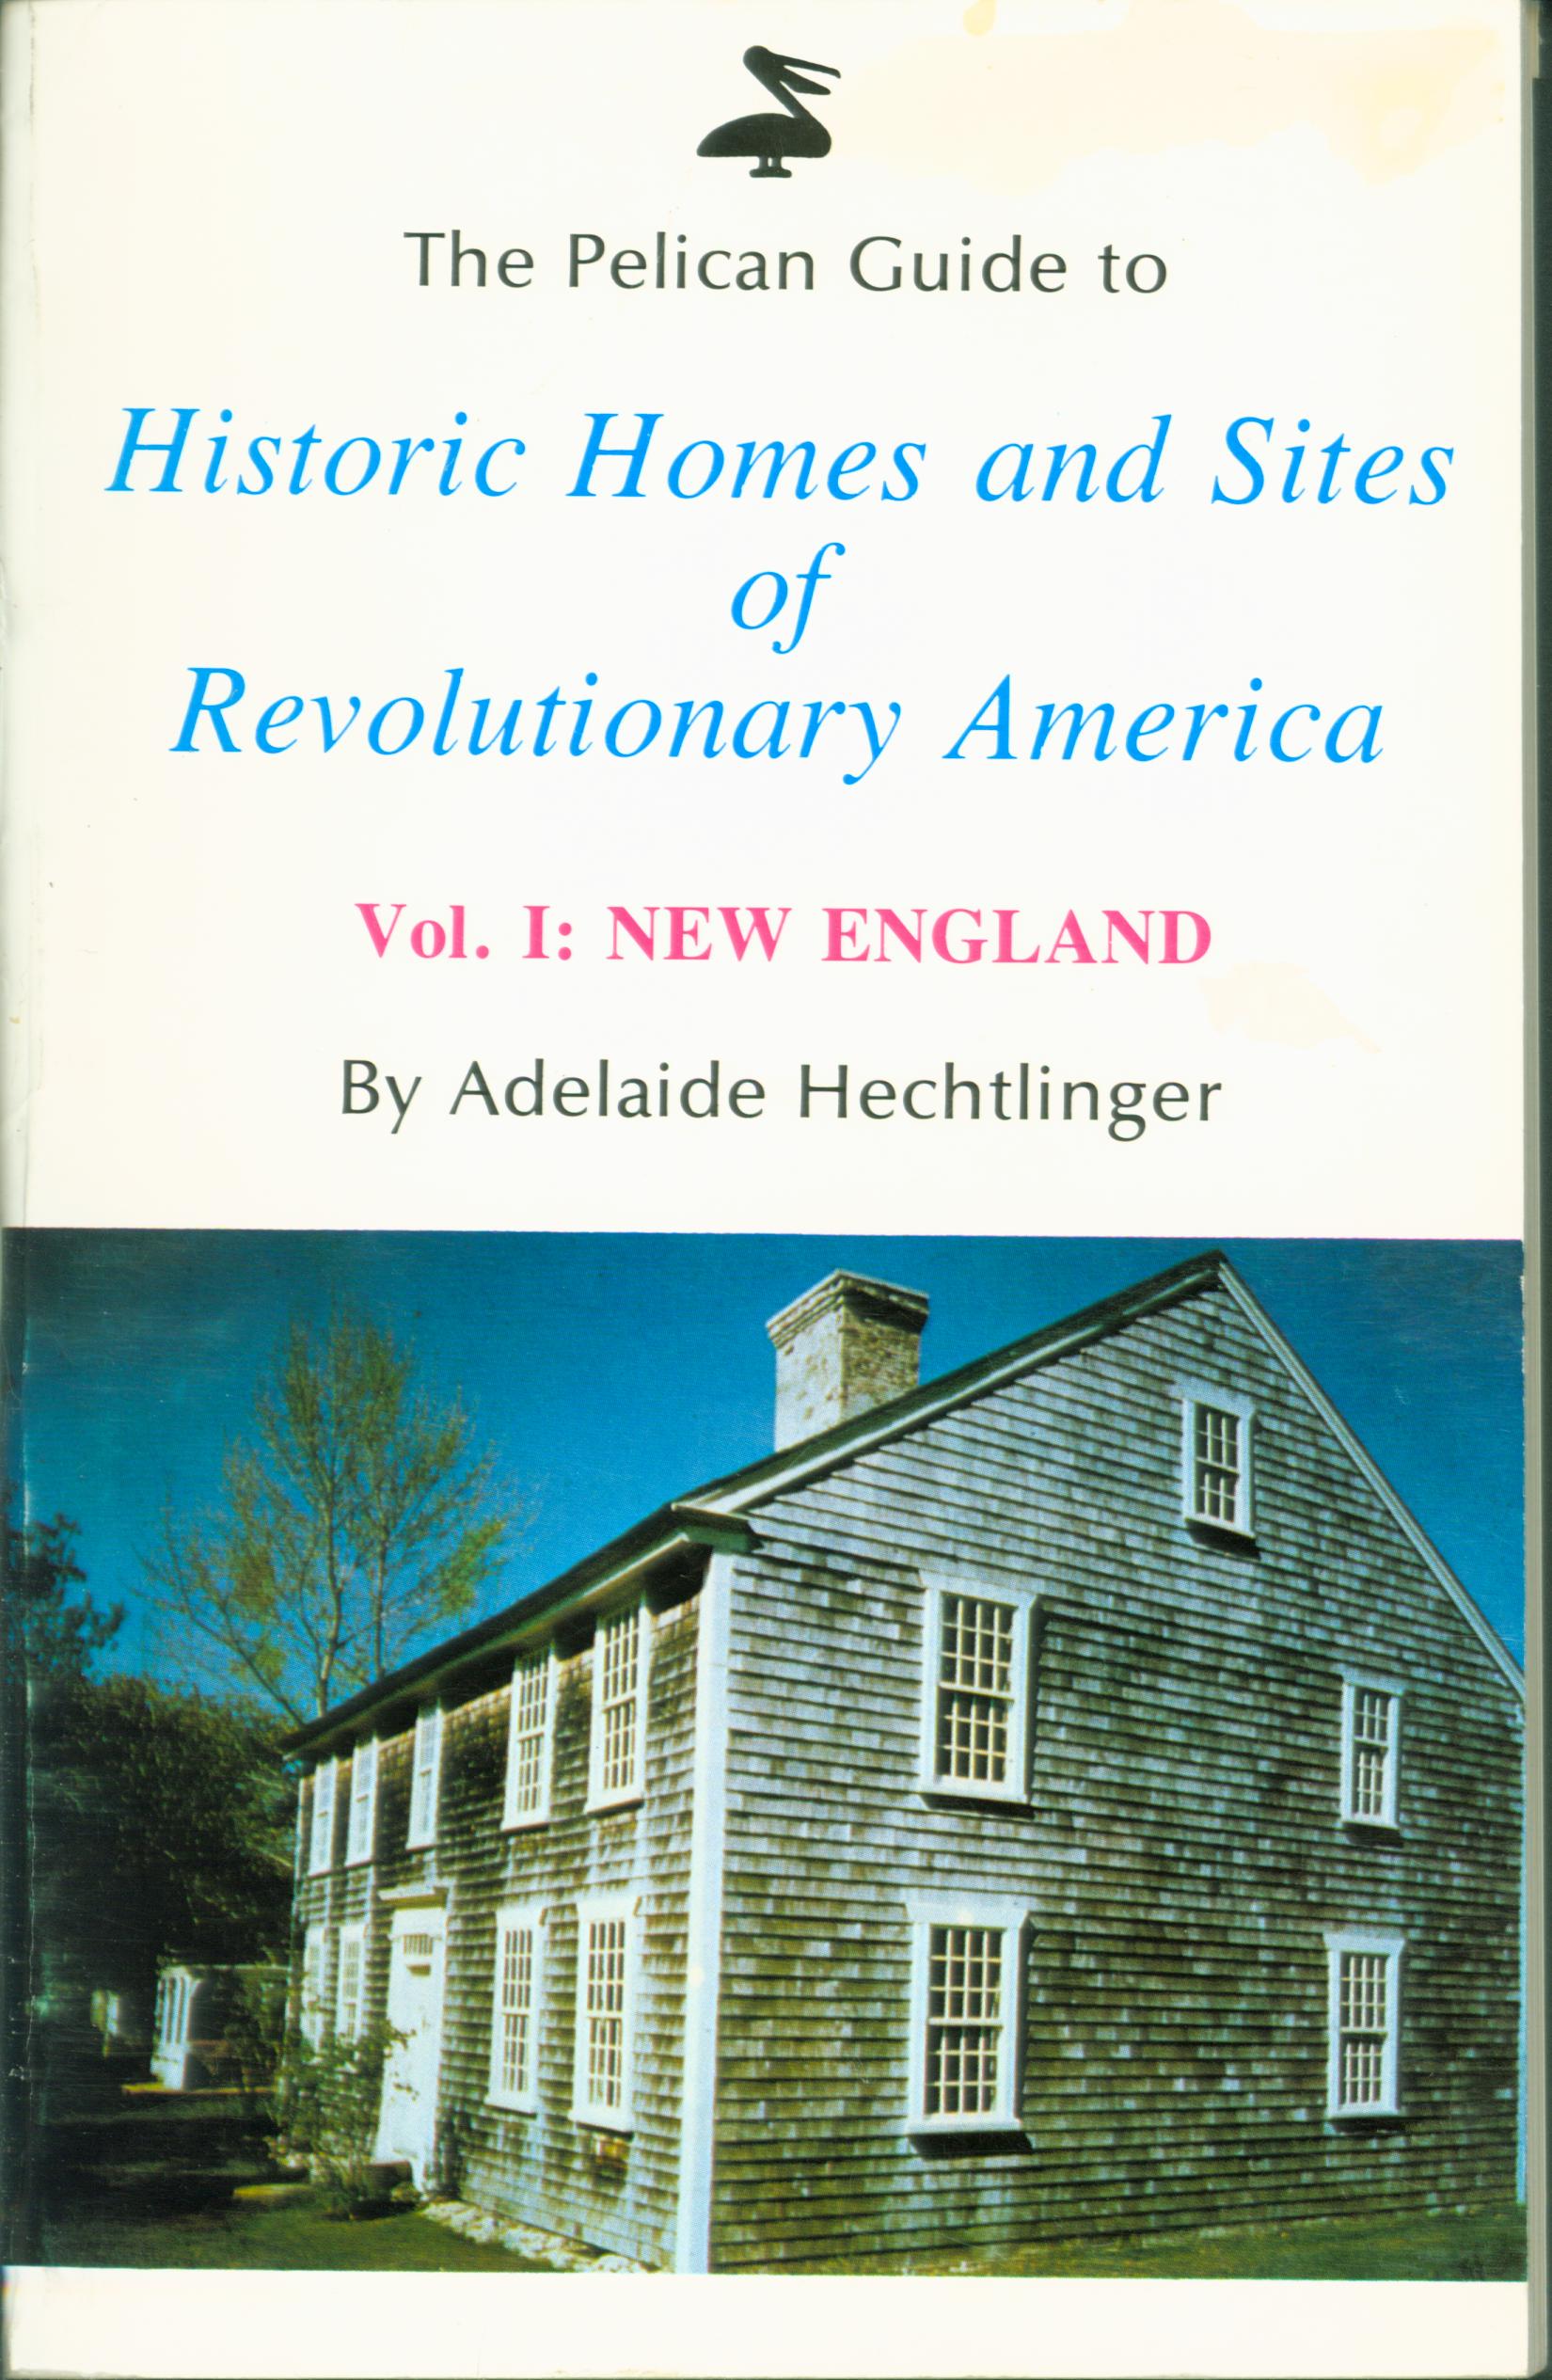 THE PELICAN GUIDE TO HISTORIC HOMES AND SITES OF REVOLUTIONARY AMERICA, Vol. 1: New England